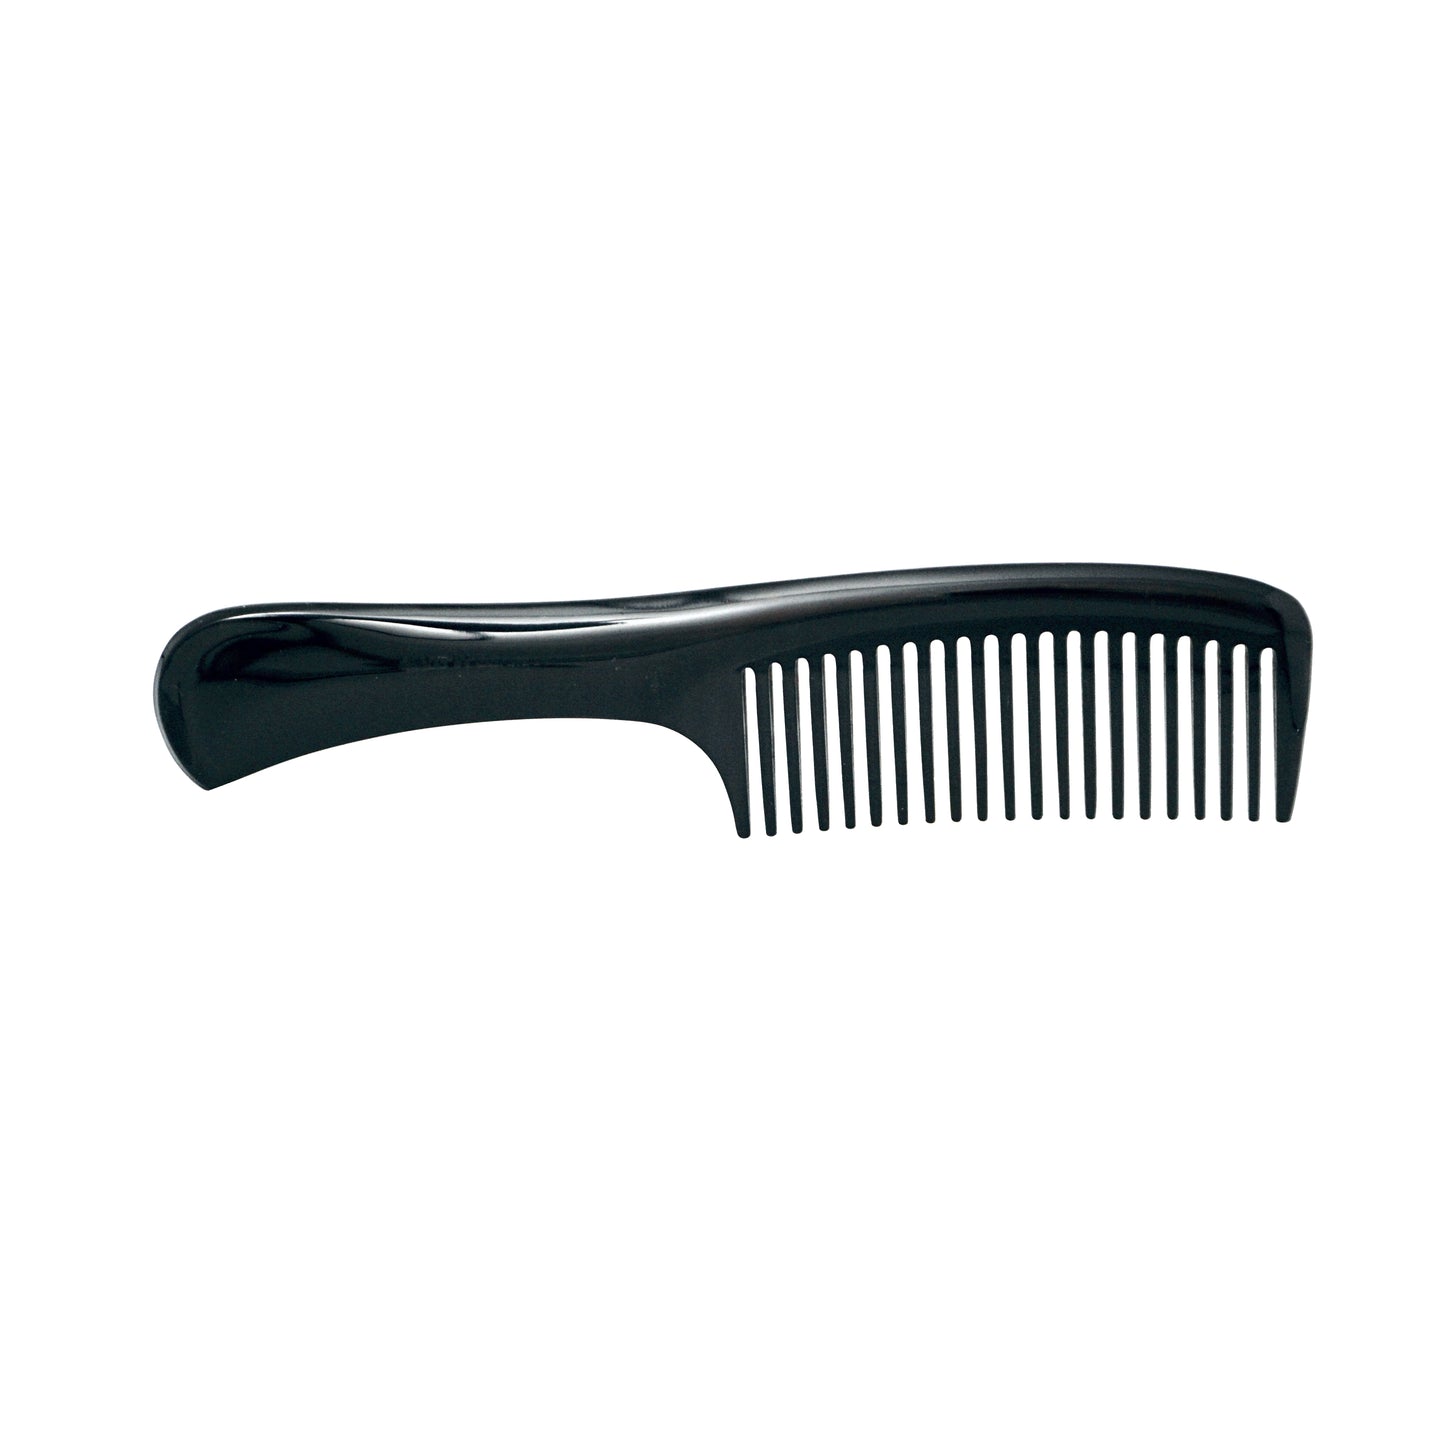 7in Course Tooth Handle Comb, Hercules Sagemann 703W